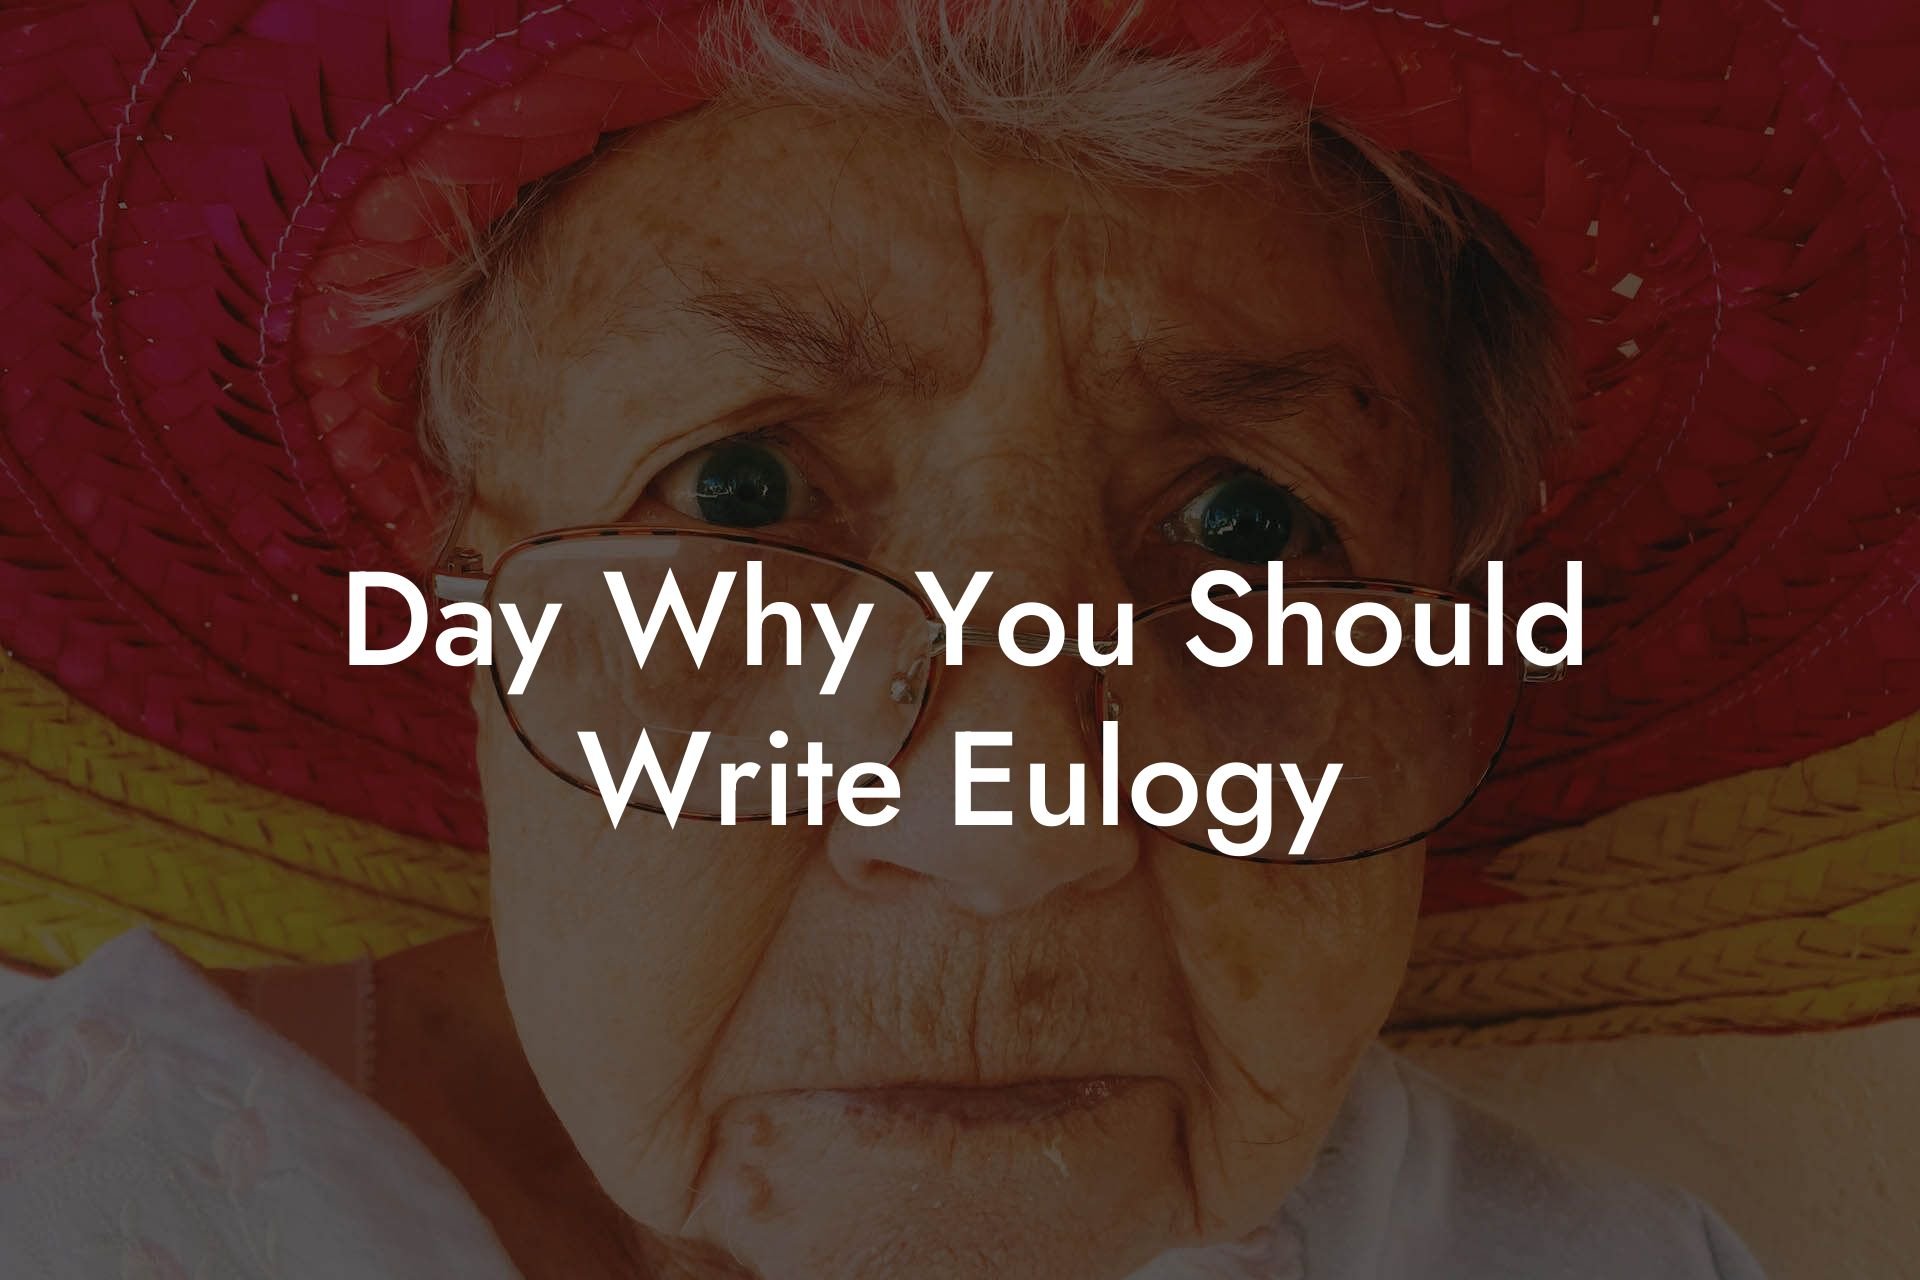 Day Why You Should Write Eulogy